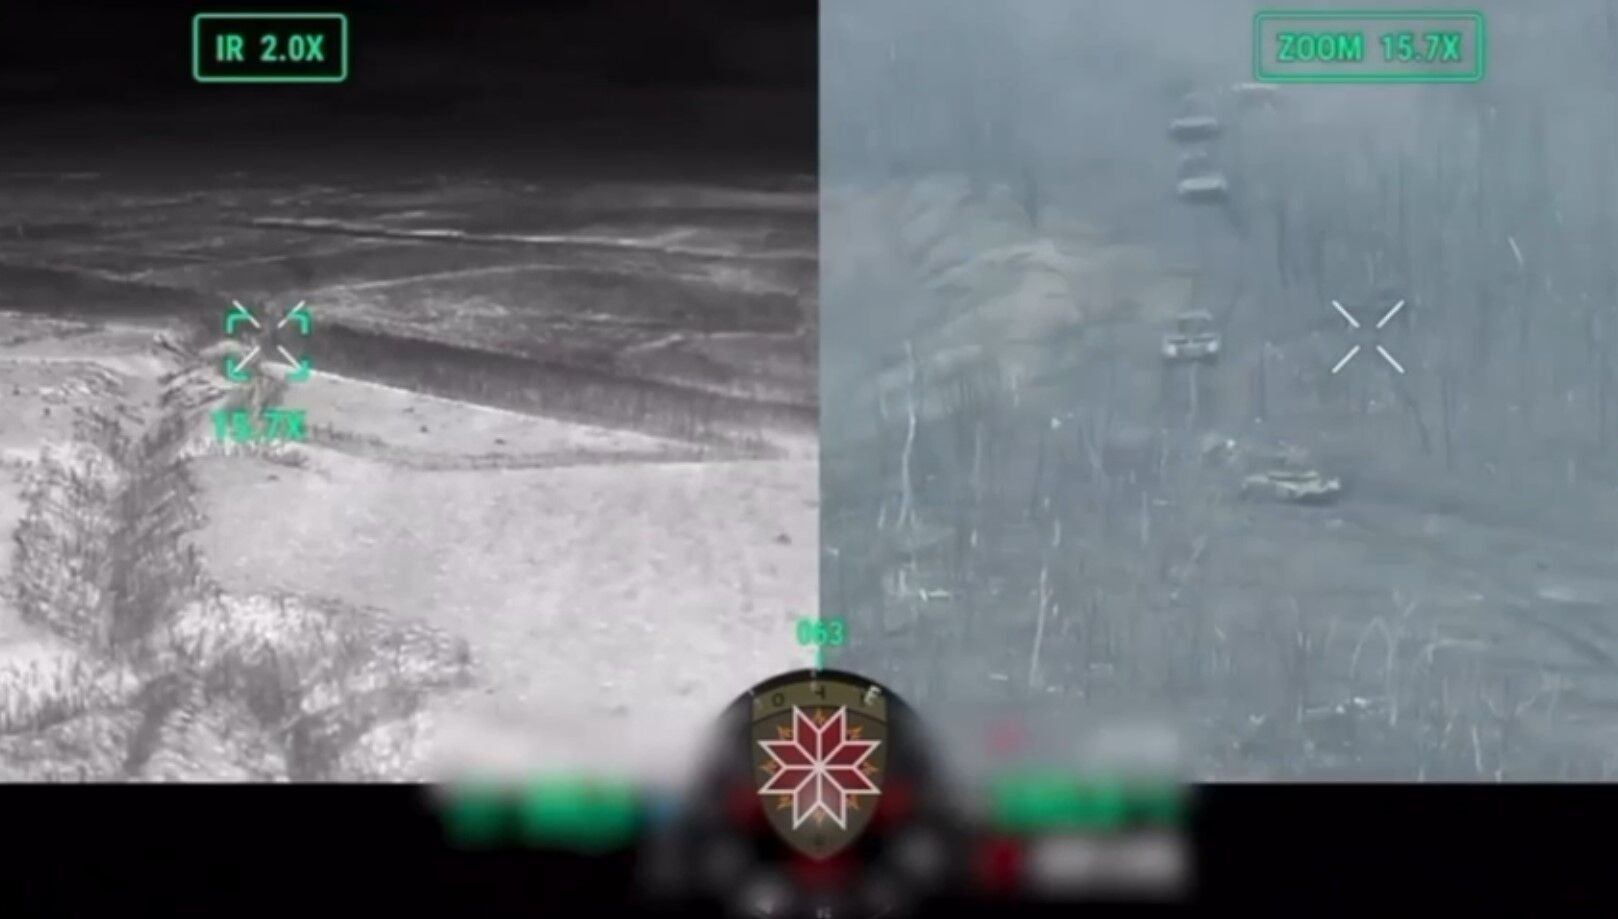 The enemy's plans thwarted: Syrskyi shows how Defense Forces destroy Russian equipment. Video 